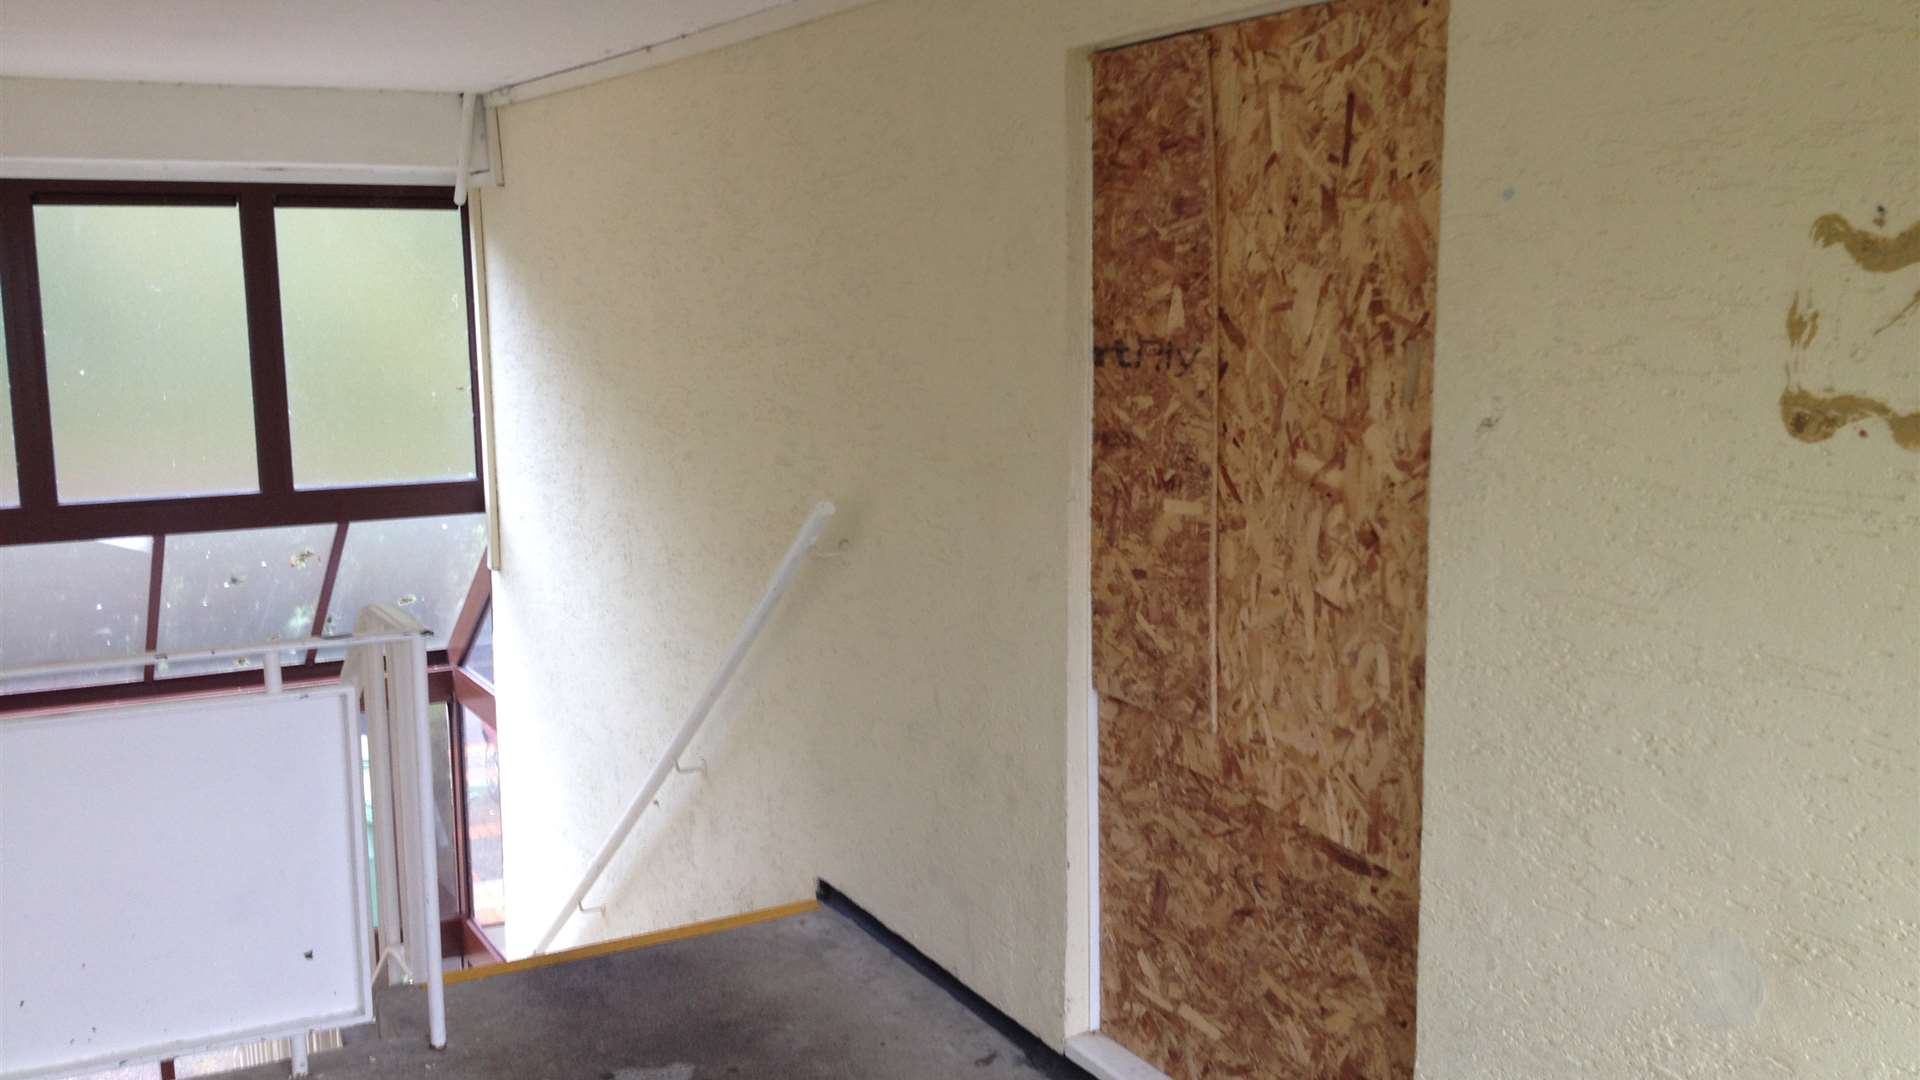 Michael Payne's boarded-up flat in Park Wood, Maidstone